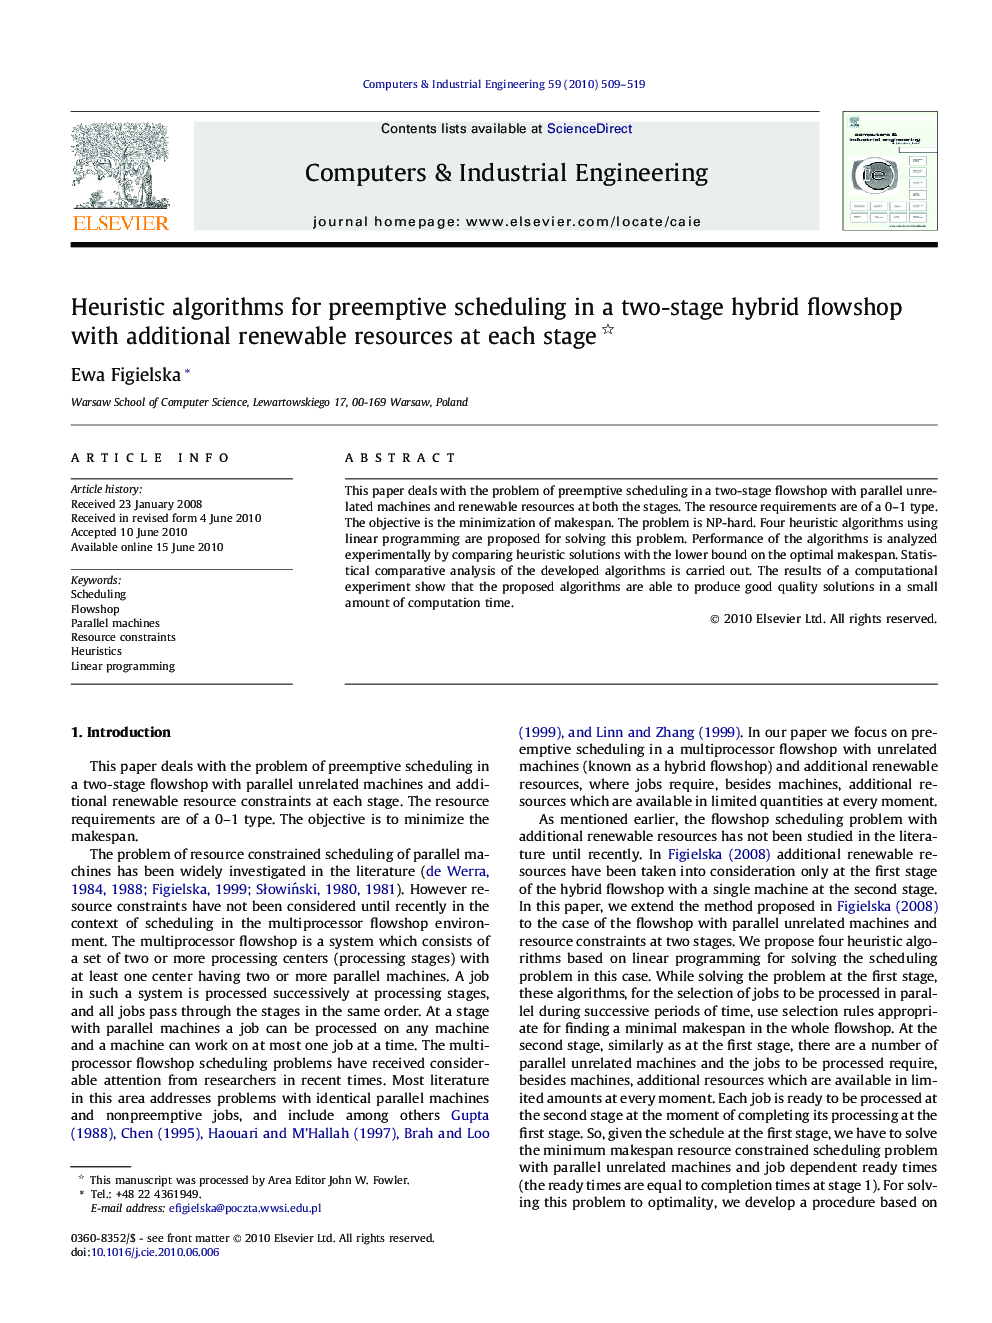 Heuristic algorithms for preemptive scheduling in a two-stage hybrid flowshop with additional renewable resources at each stage 